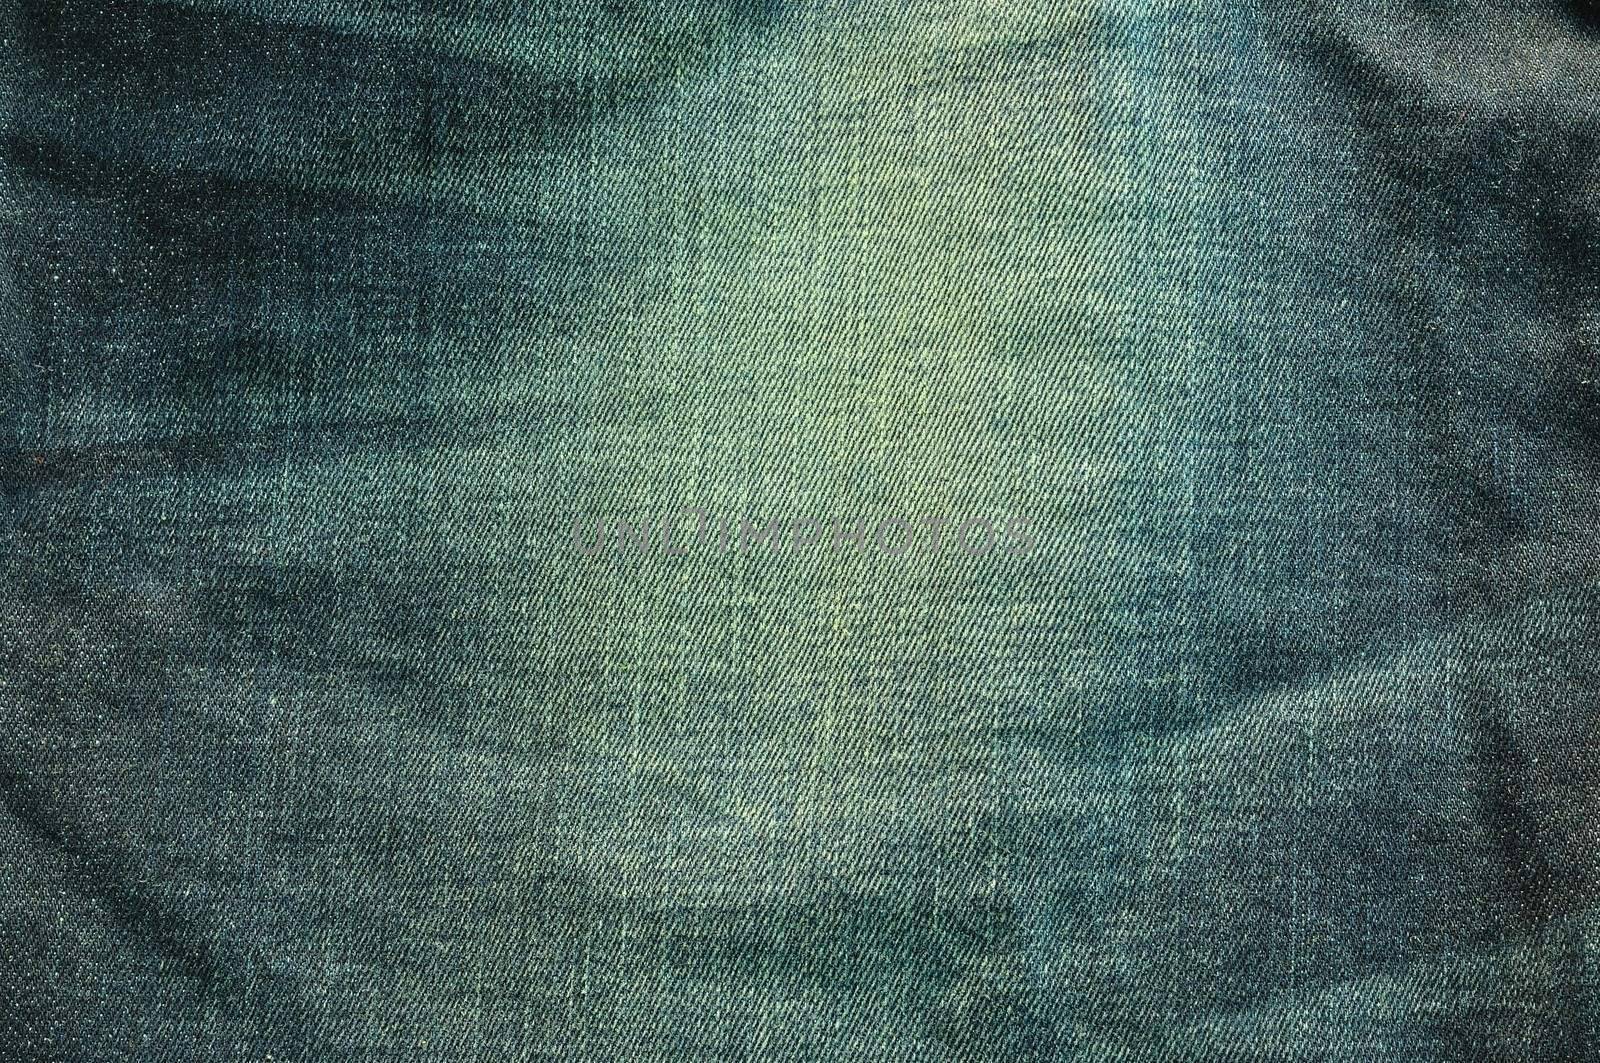 Texture Background of grunge blue jeans